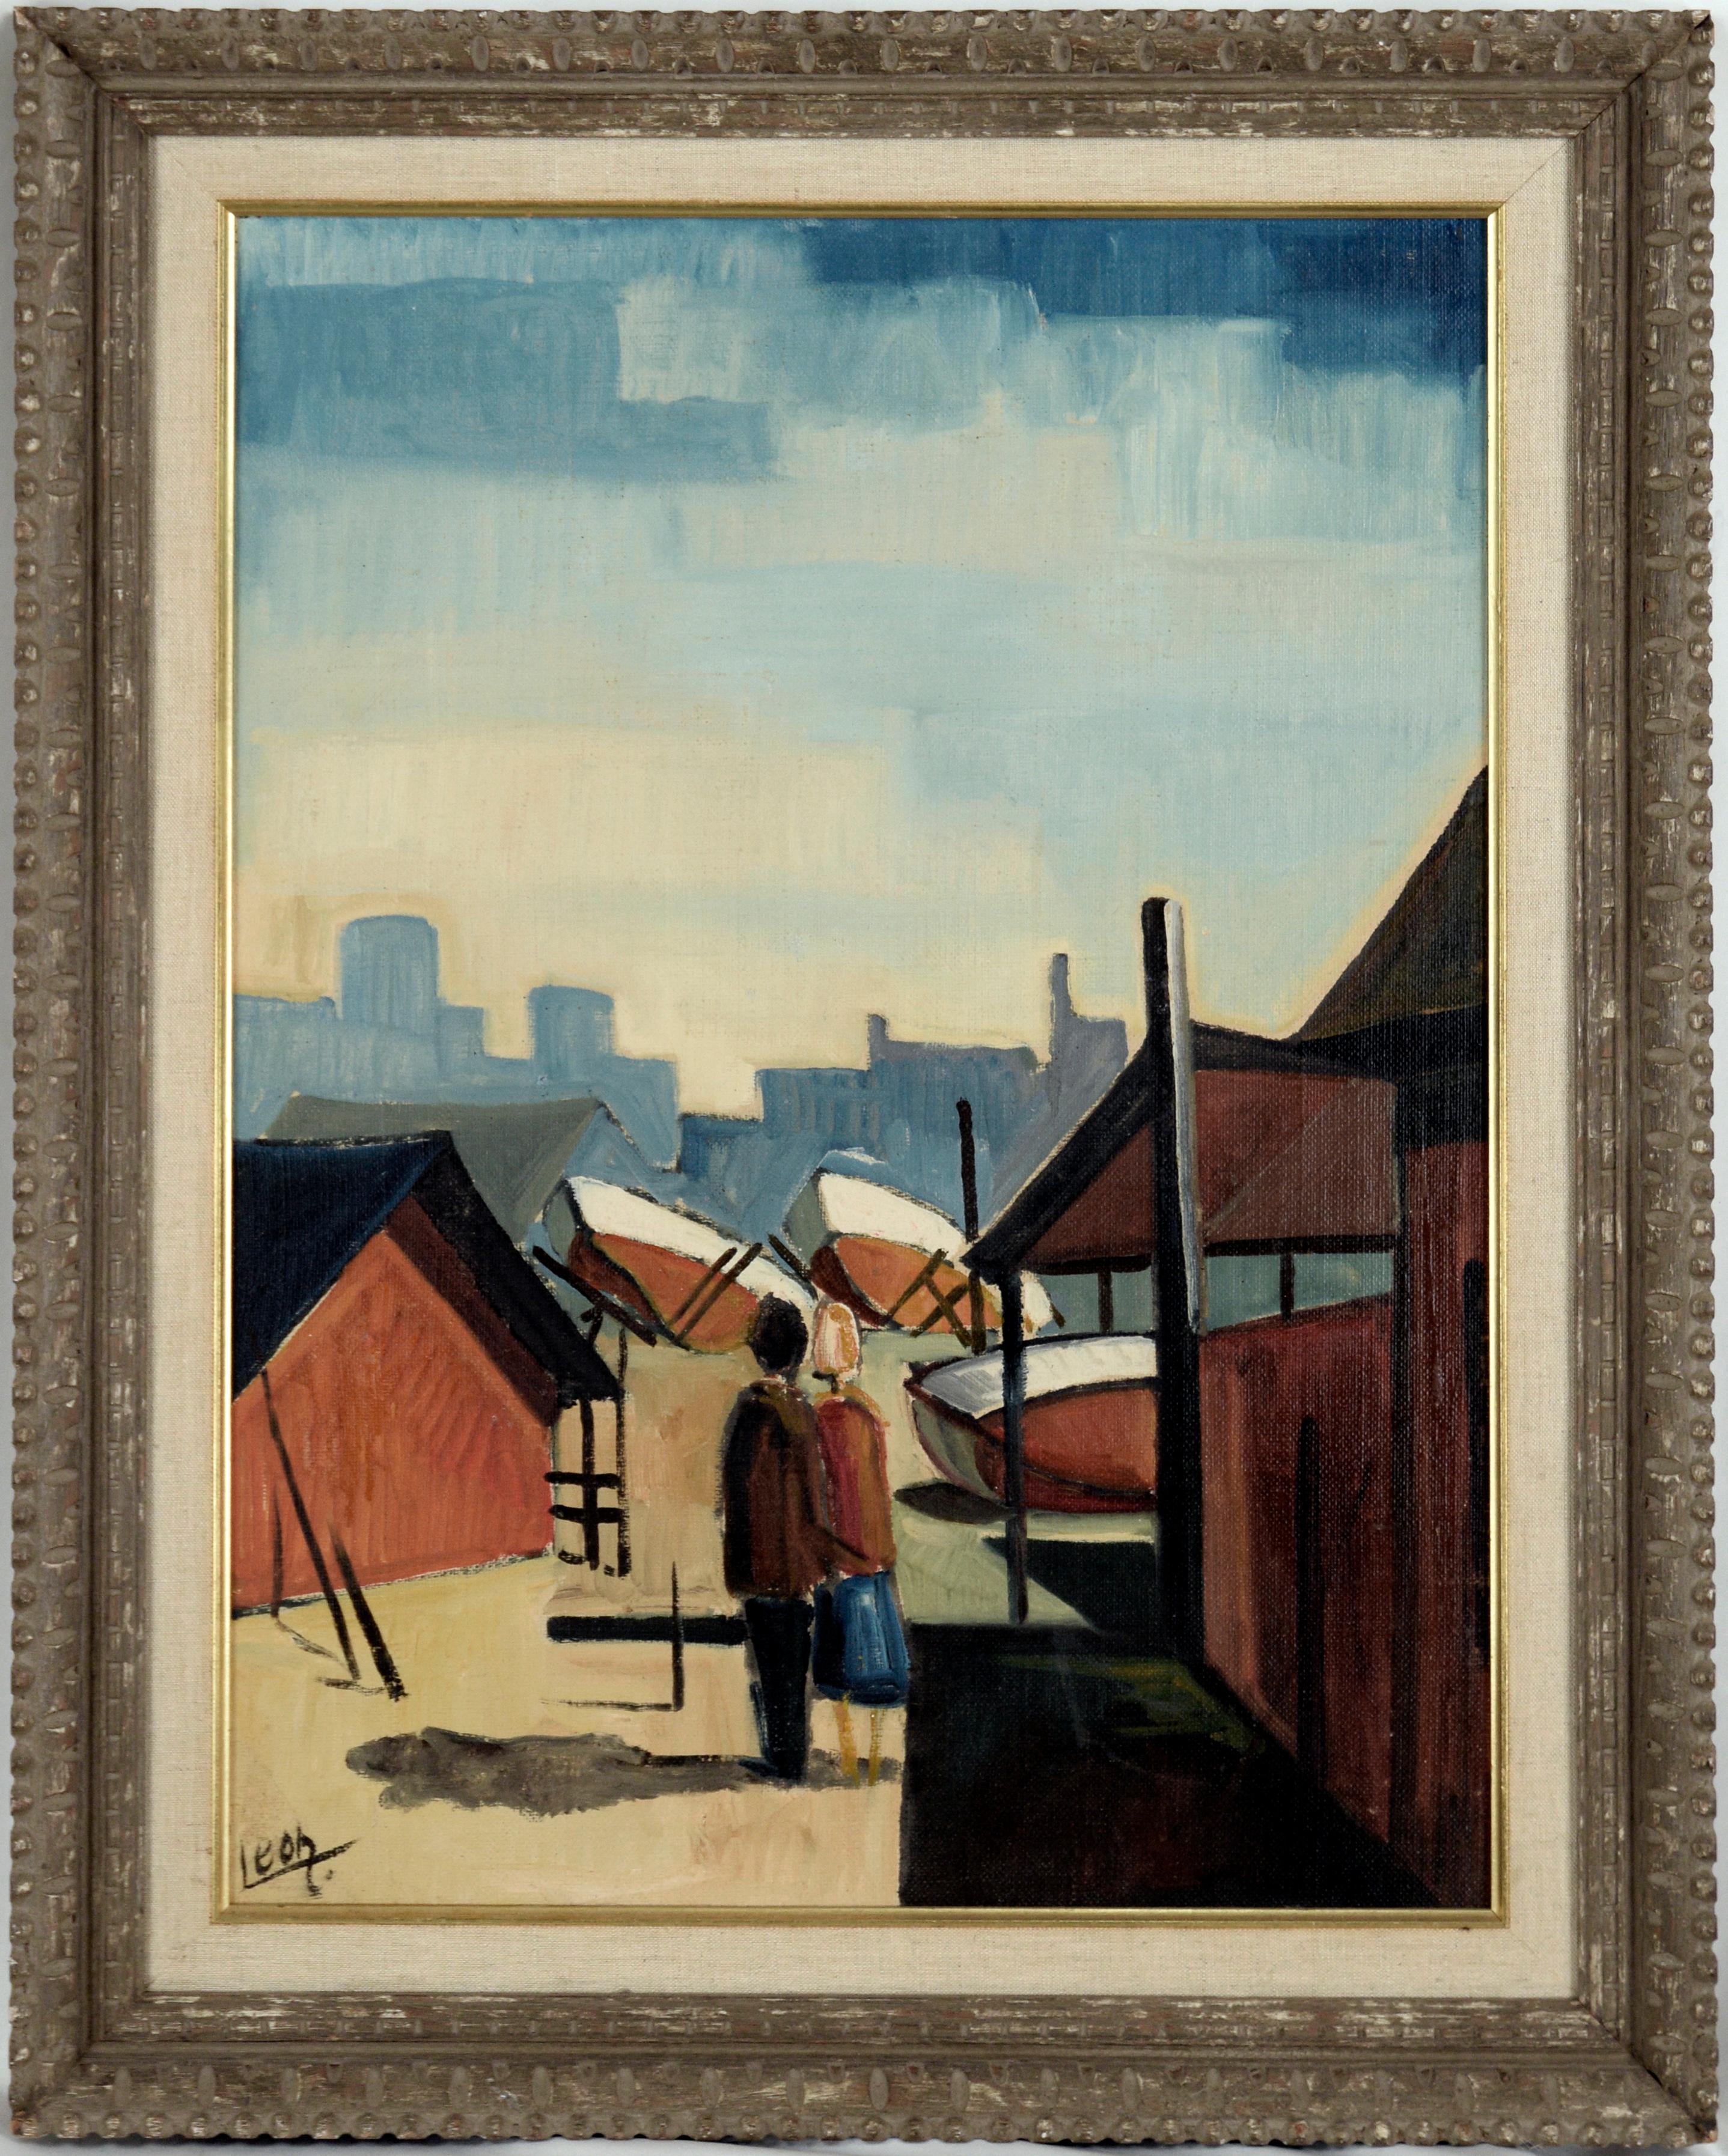 Unknown Landscape Painting - Couple at the Harbor, Mid Century Modern Figurative Cityscape with Boats 